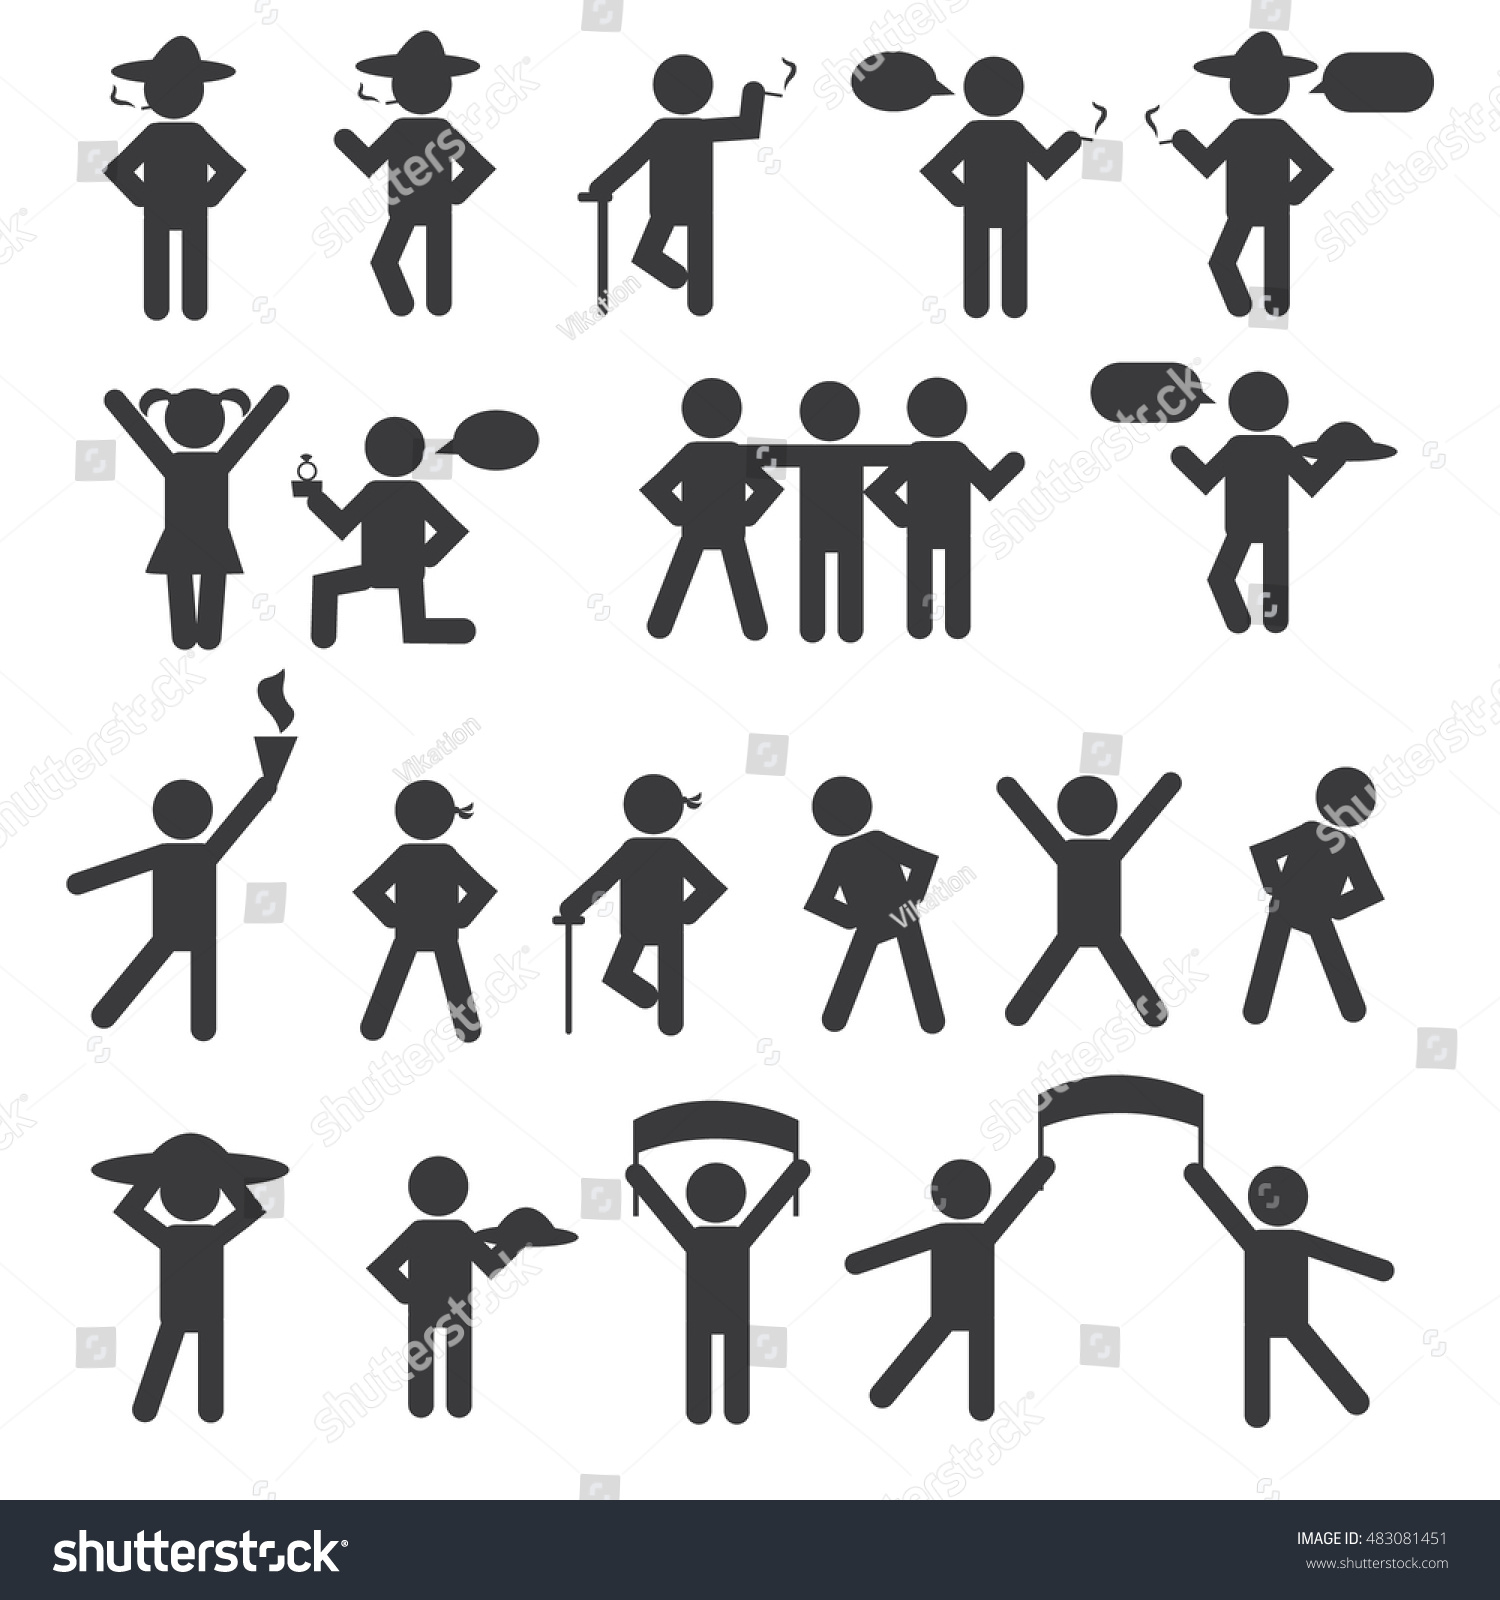 People Person Basic Body Posture Stick Stock Vector (Royalty Free ...